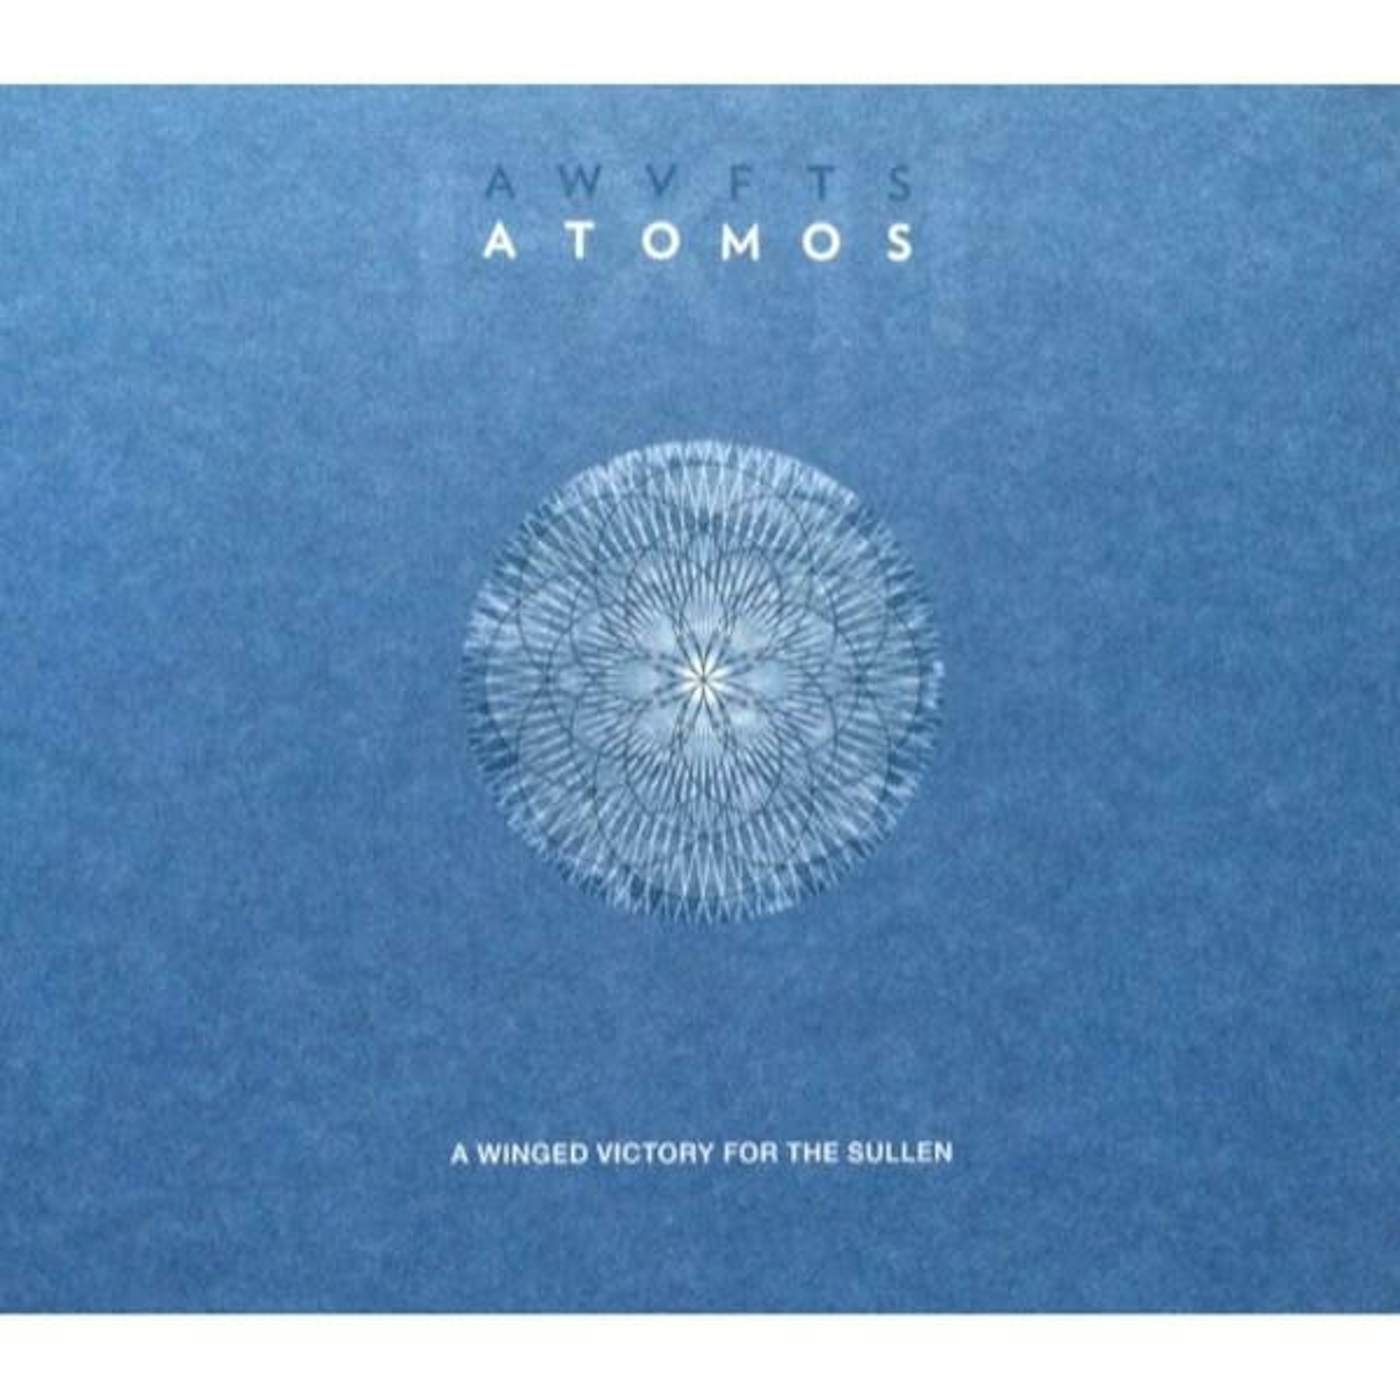 A Winged Victory for the Sullen ATOMOS - FULL LENGTH CD